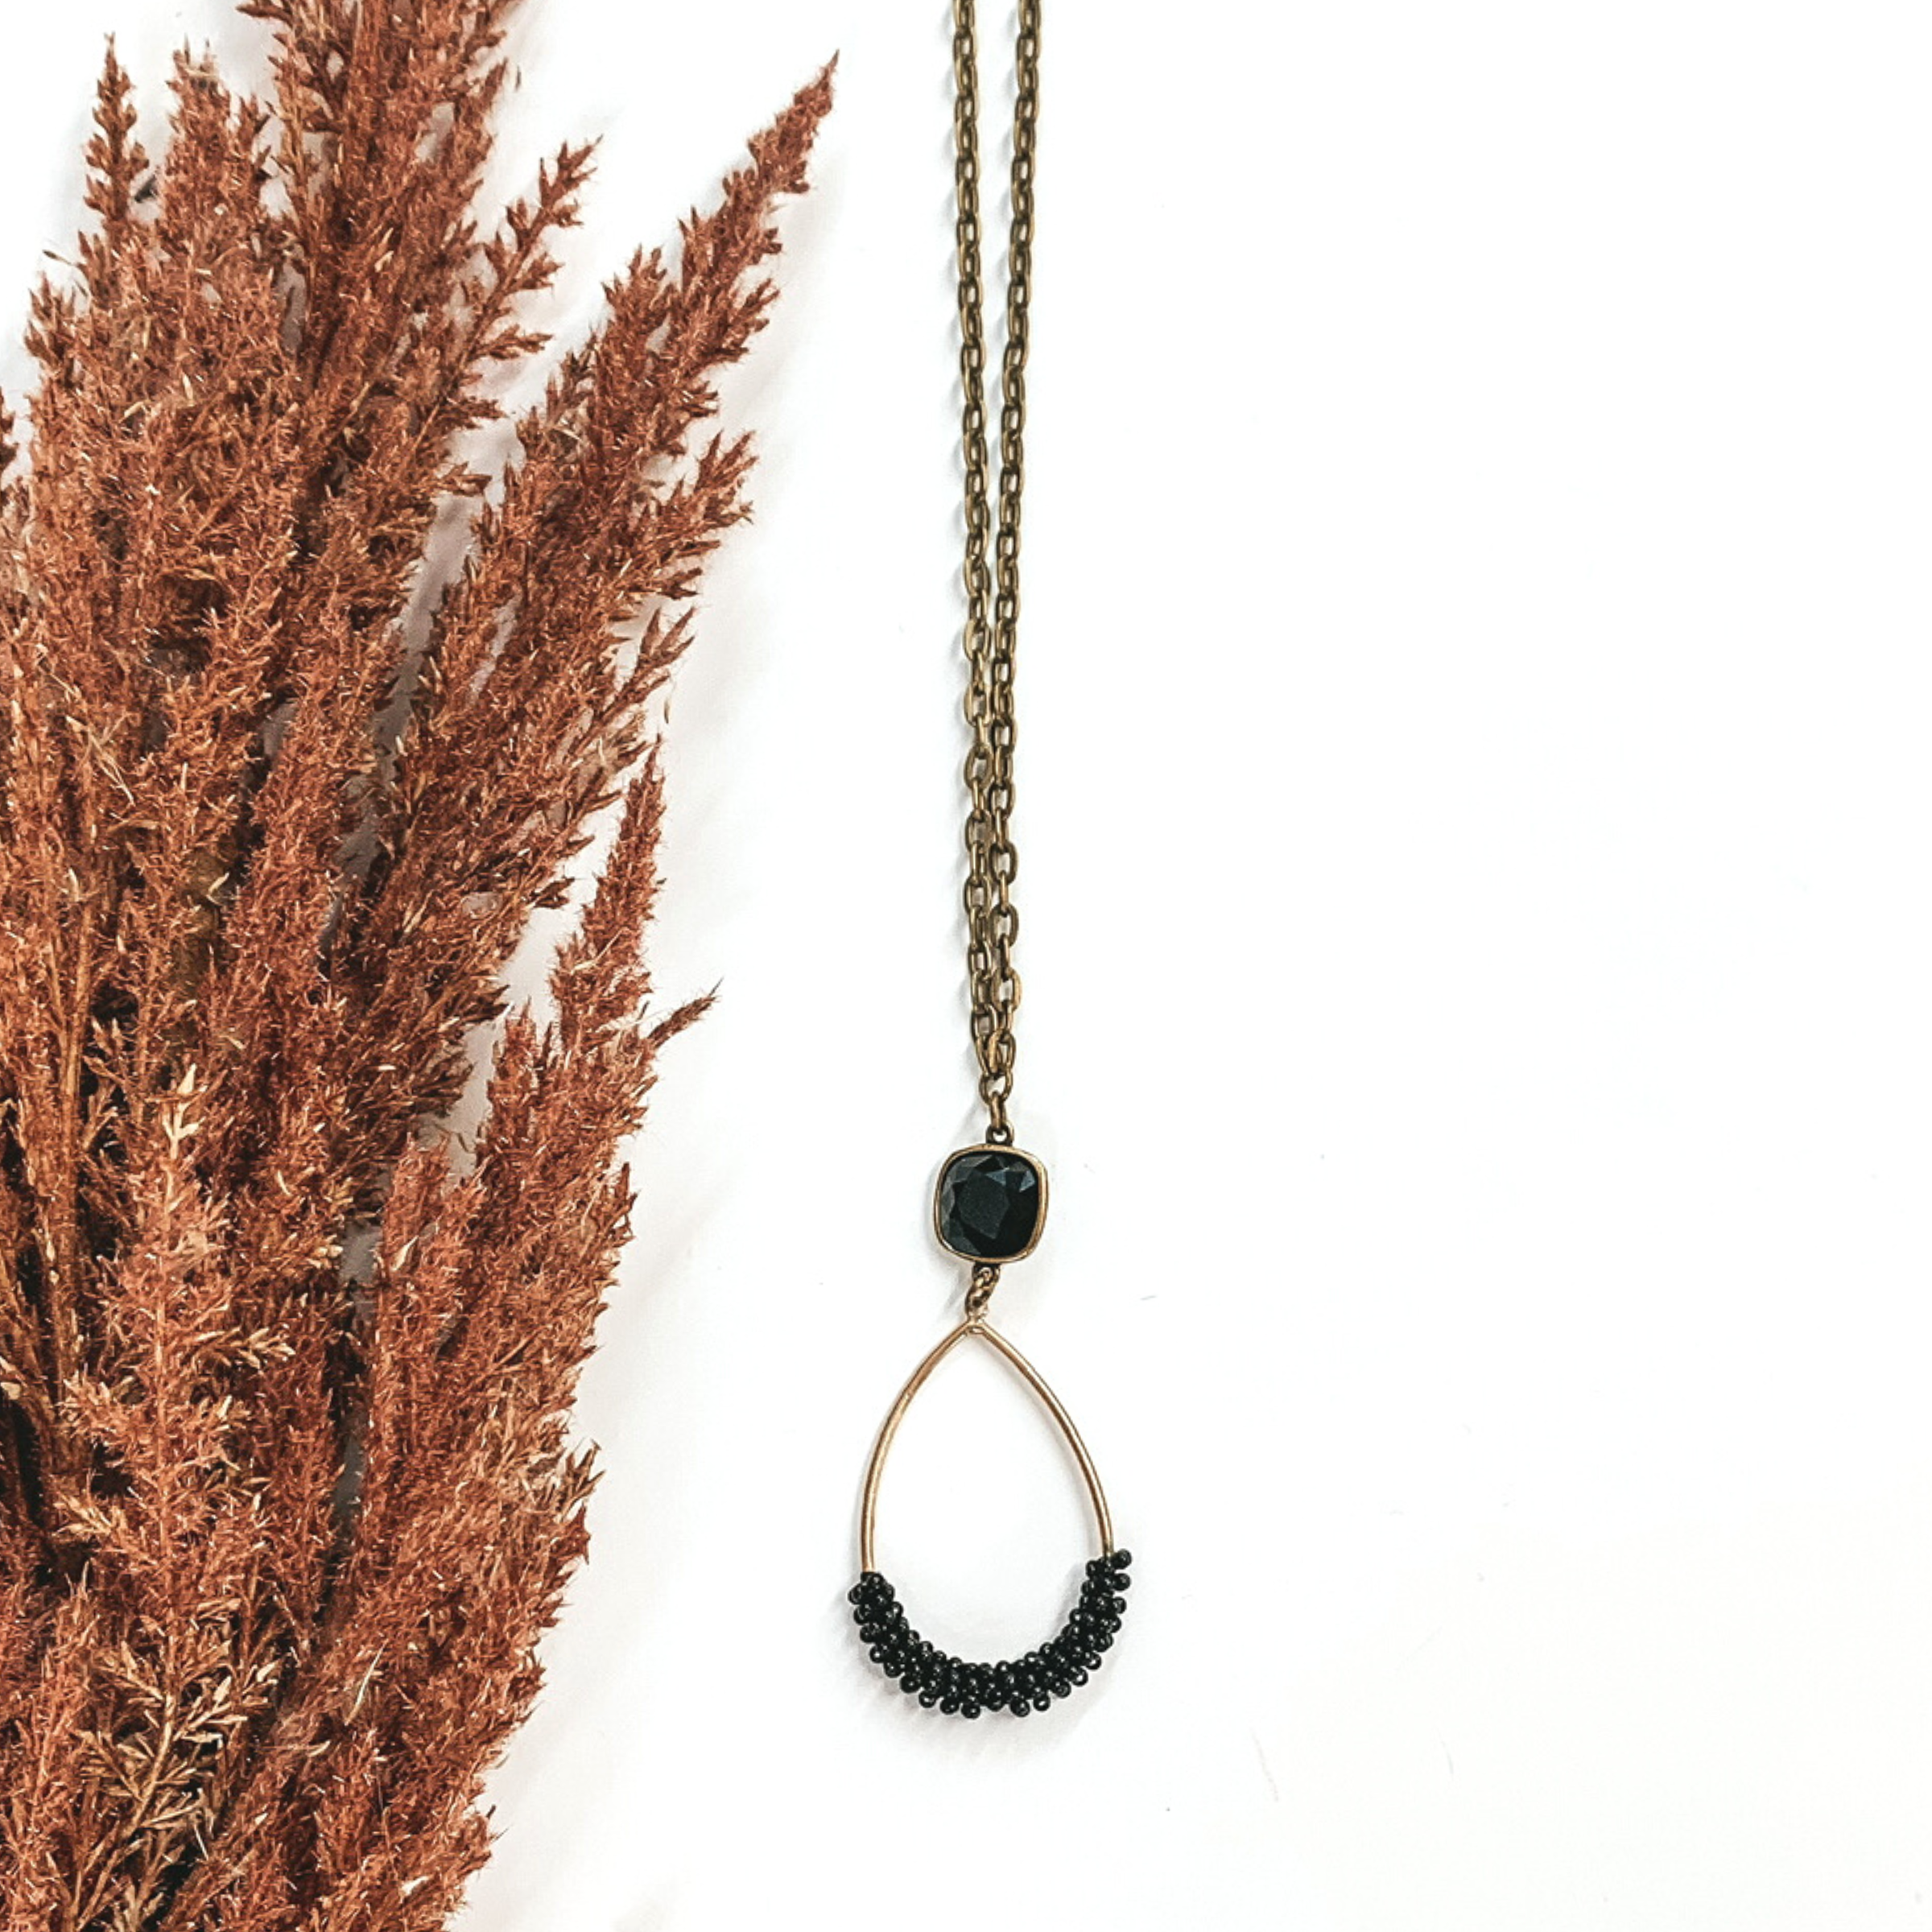 long gold chain necklace with black crystal pendant with hanging teardrop pendant with black beads